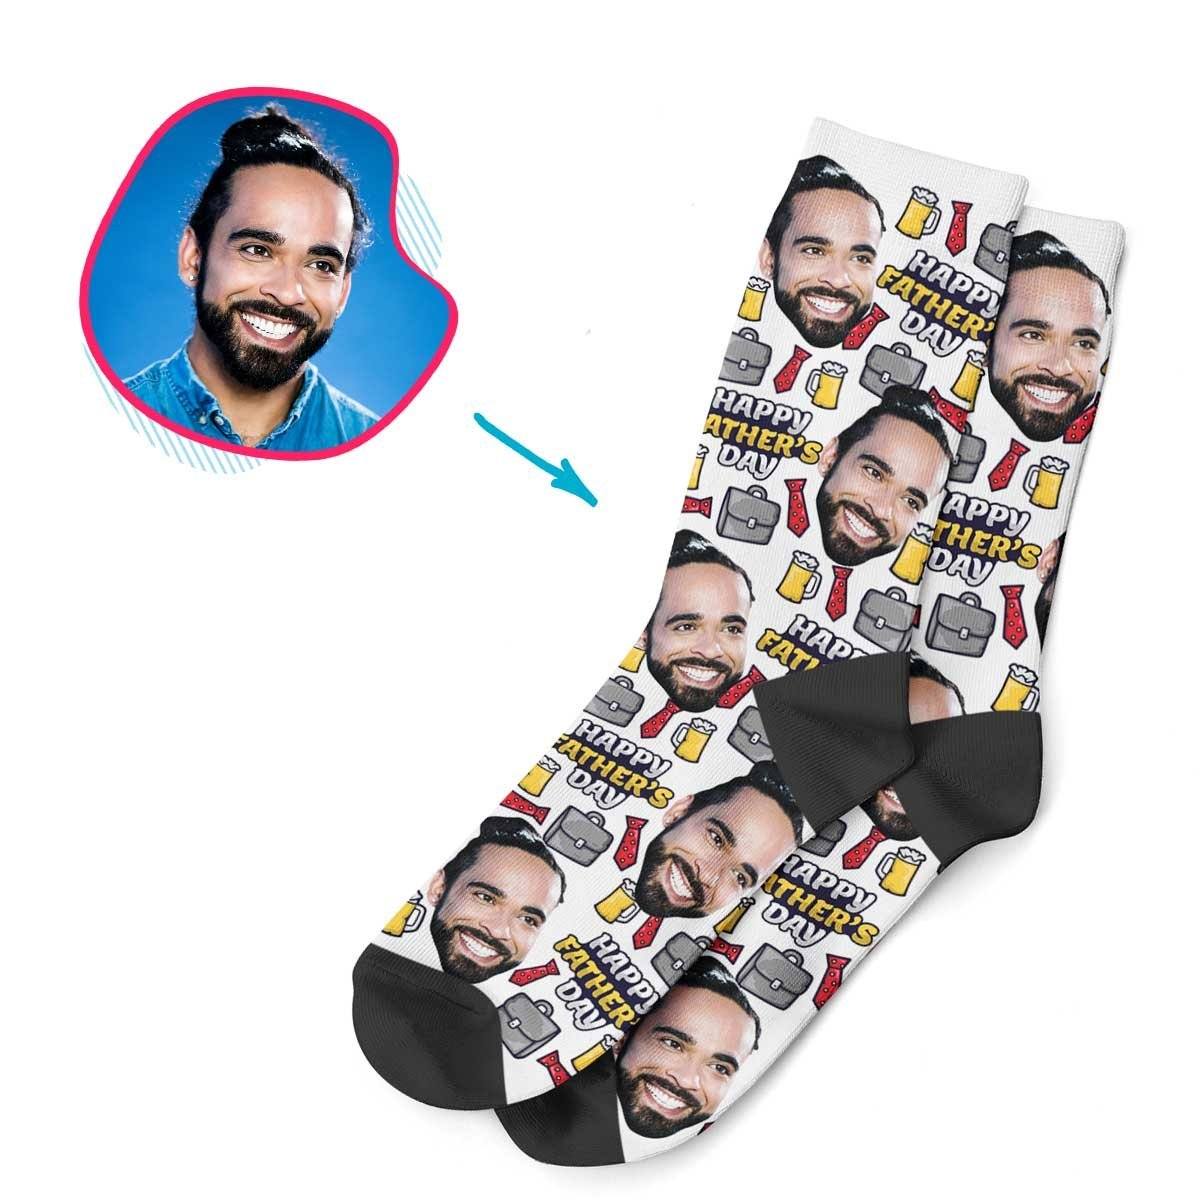 White Fathers Day personalized socks with photo of face printed on them